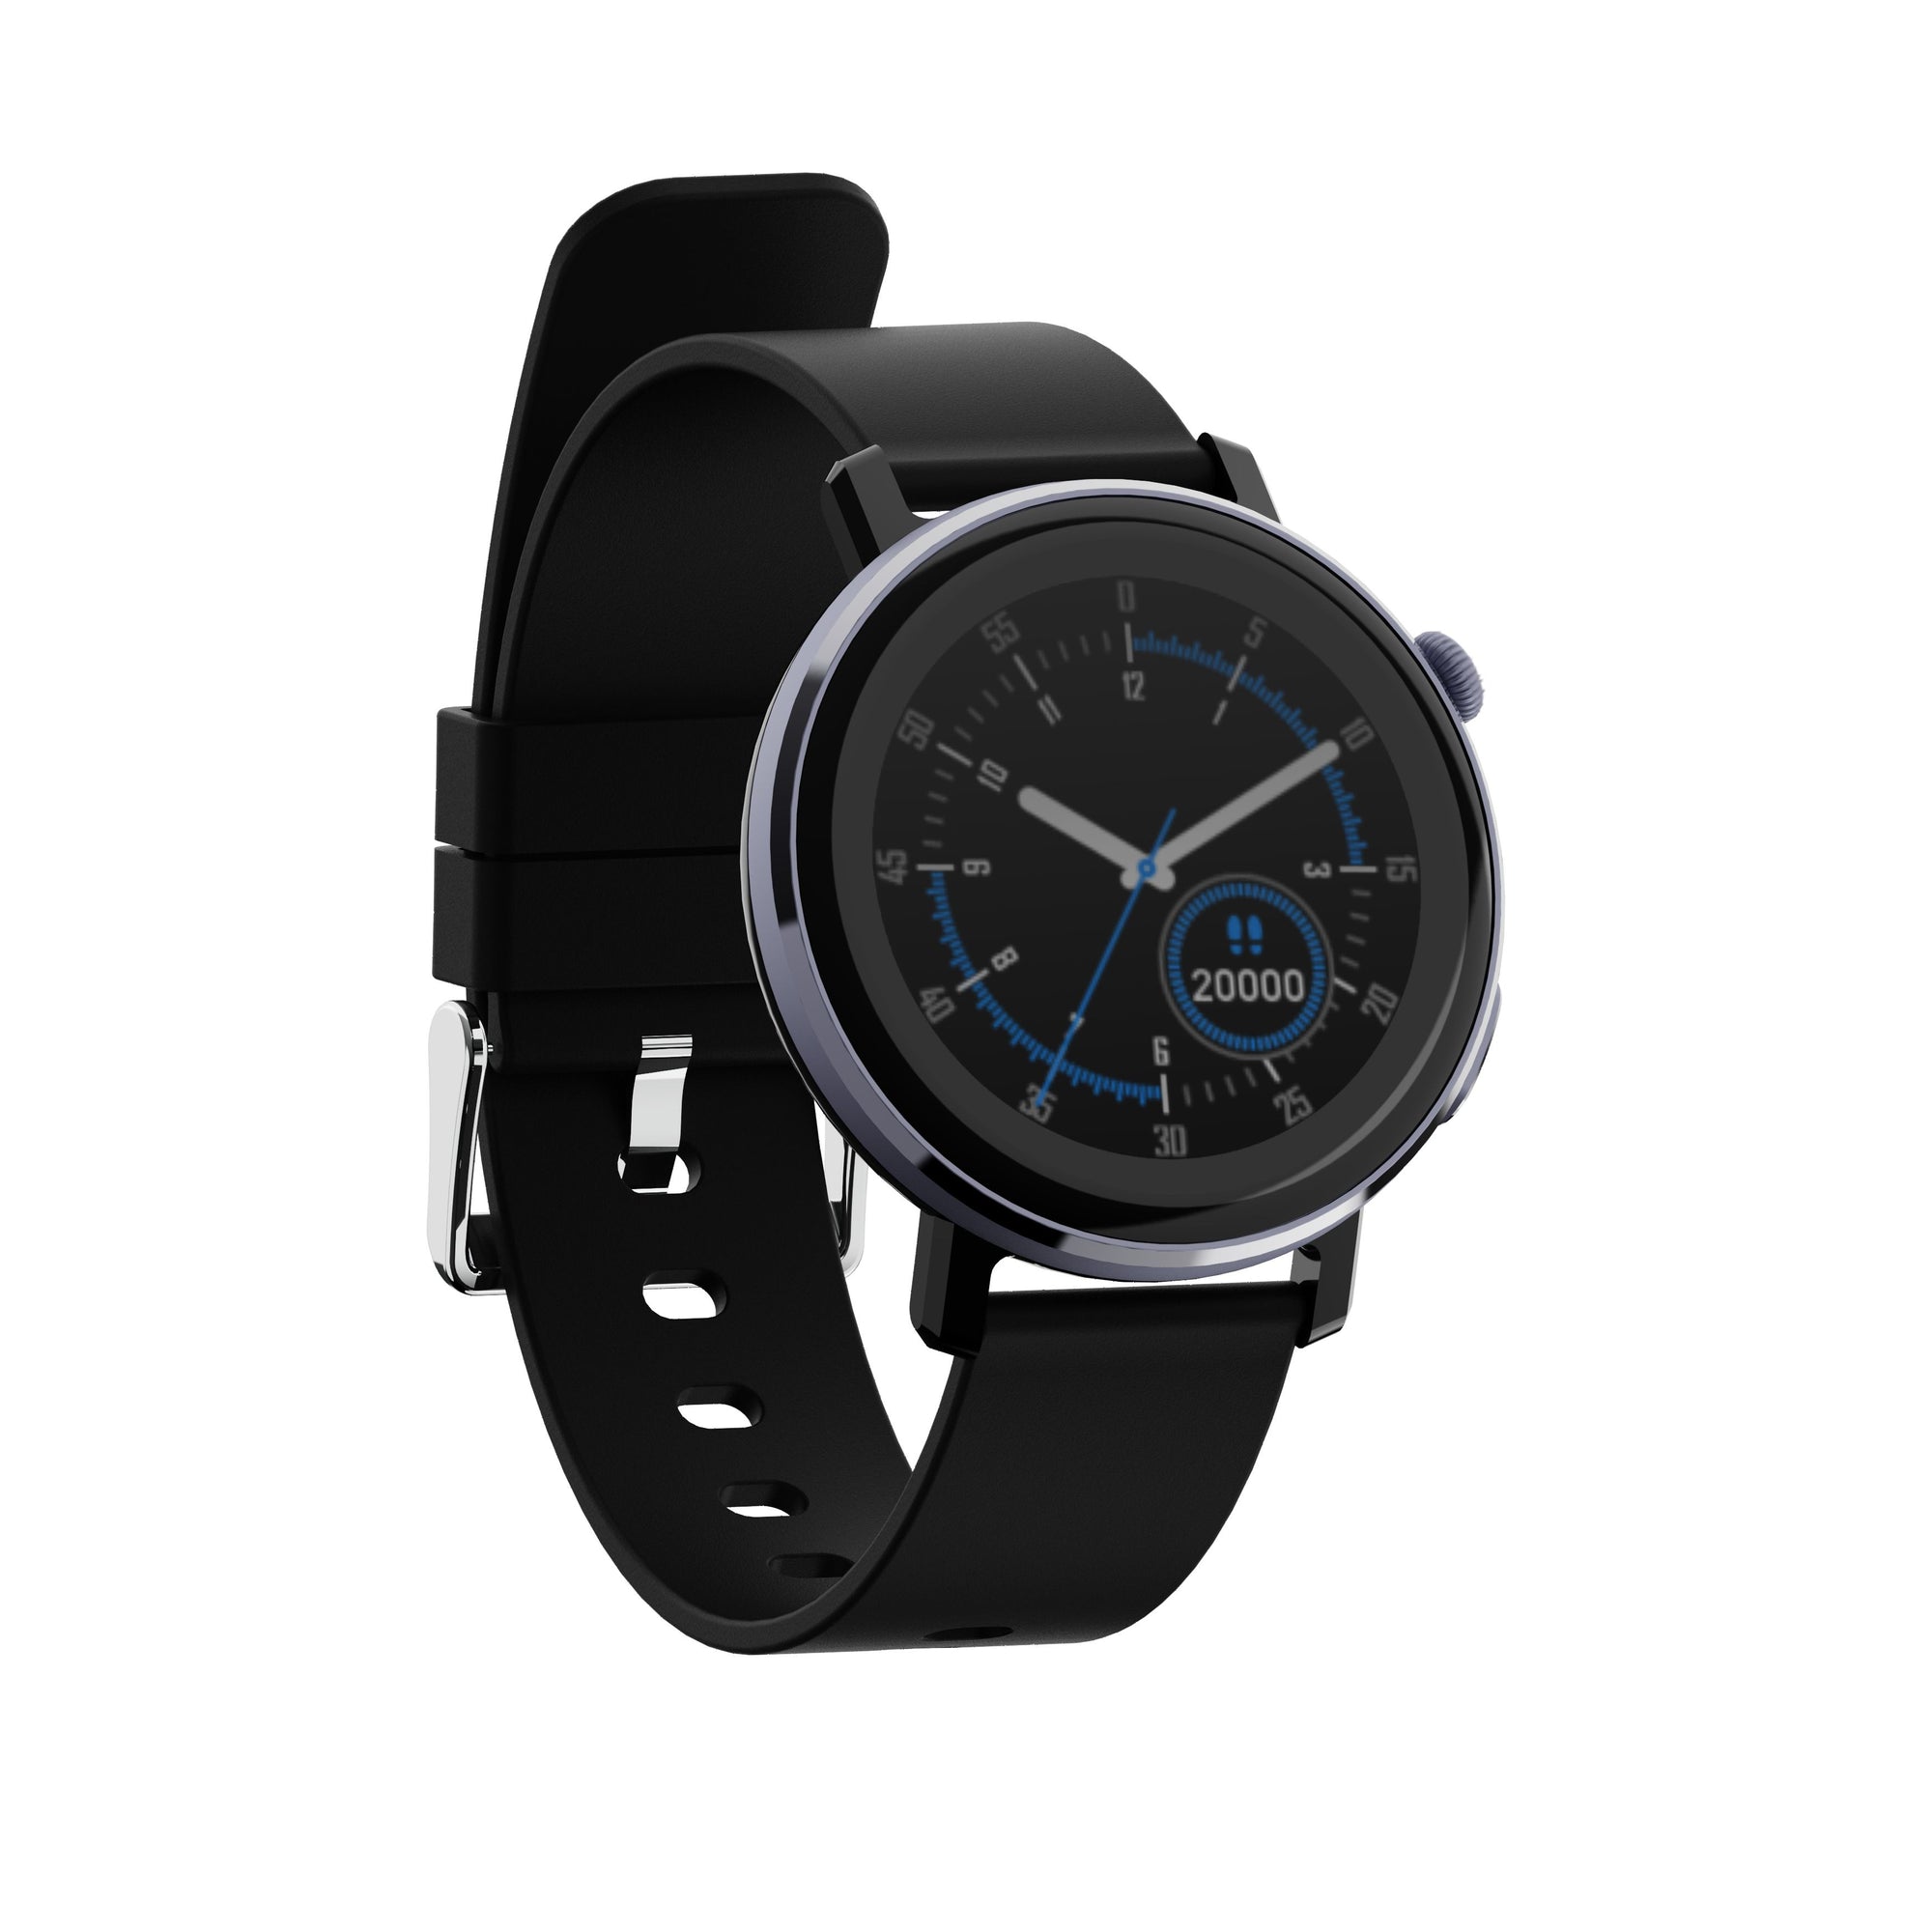 R306 - 1.28 inch Full Circle Touch Screen Smart Watch IP67 waterproof with Heart Rate/Sleep Monitor (metal chassis)